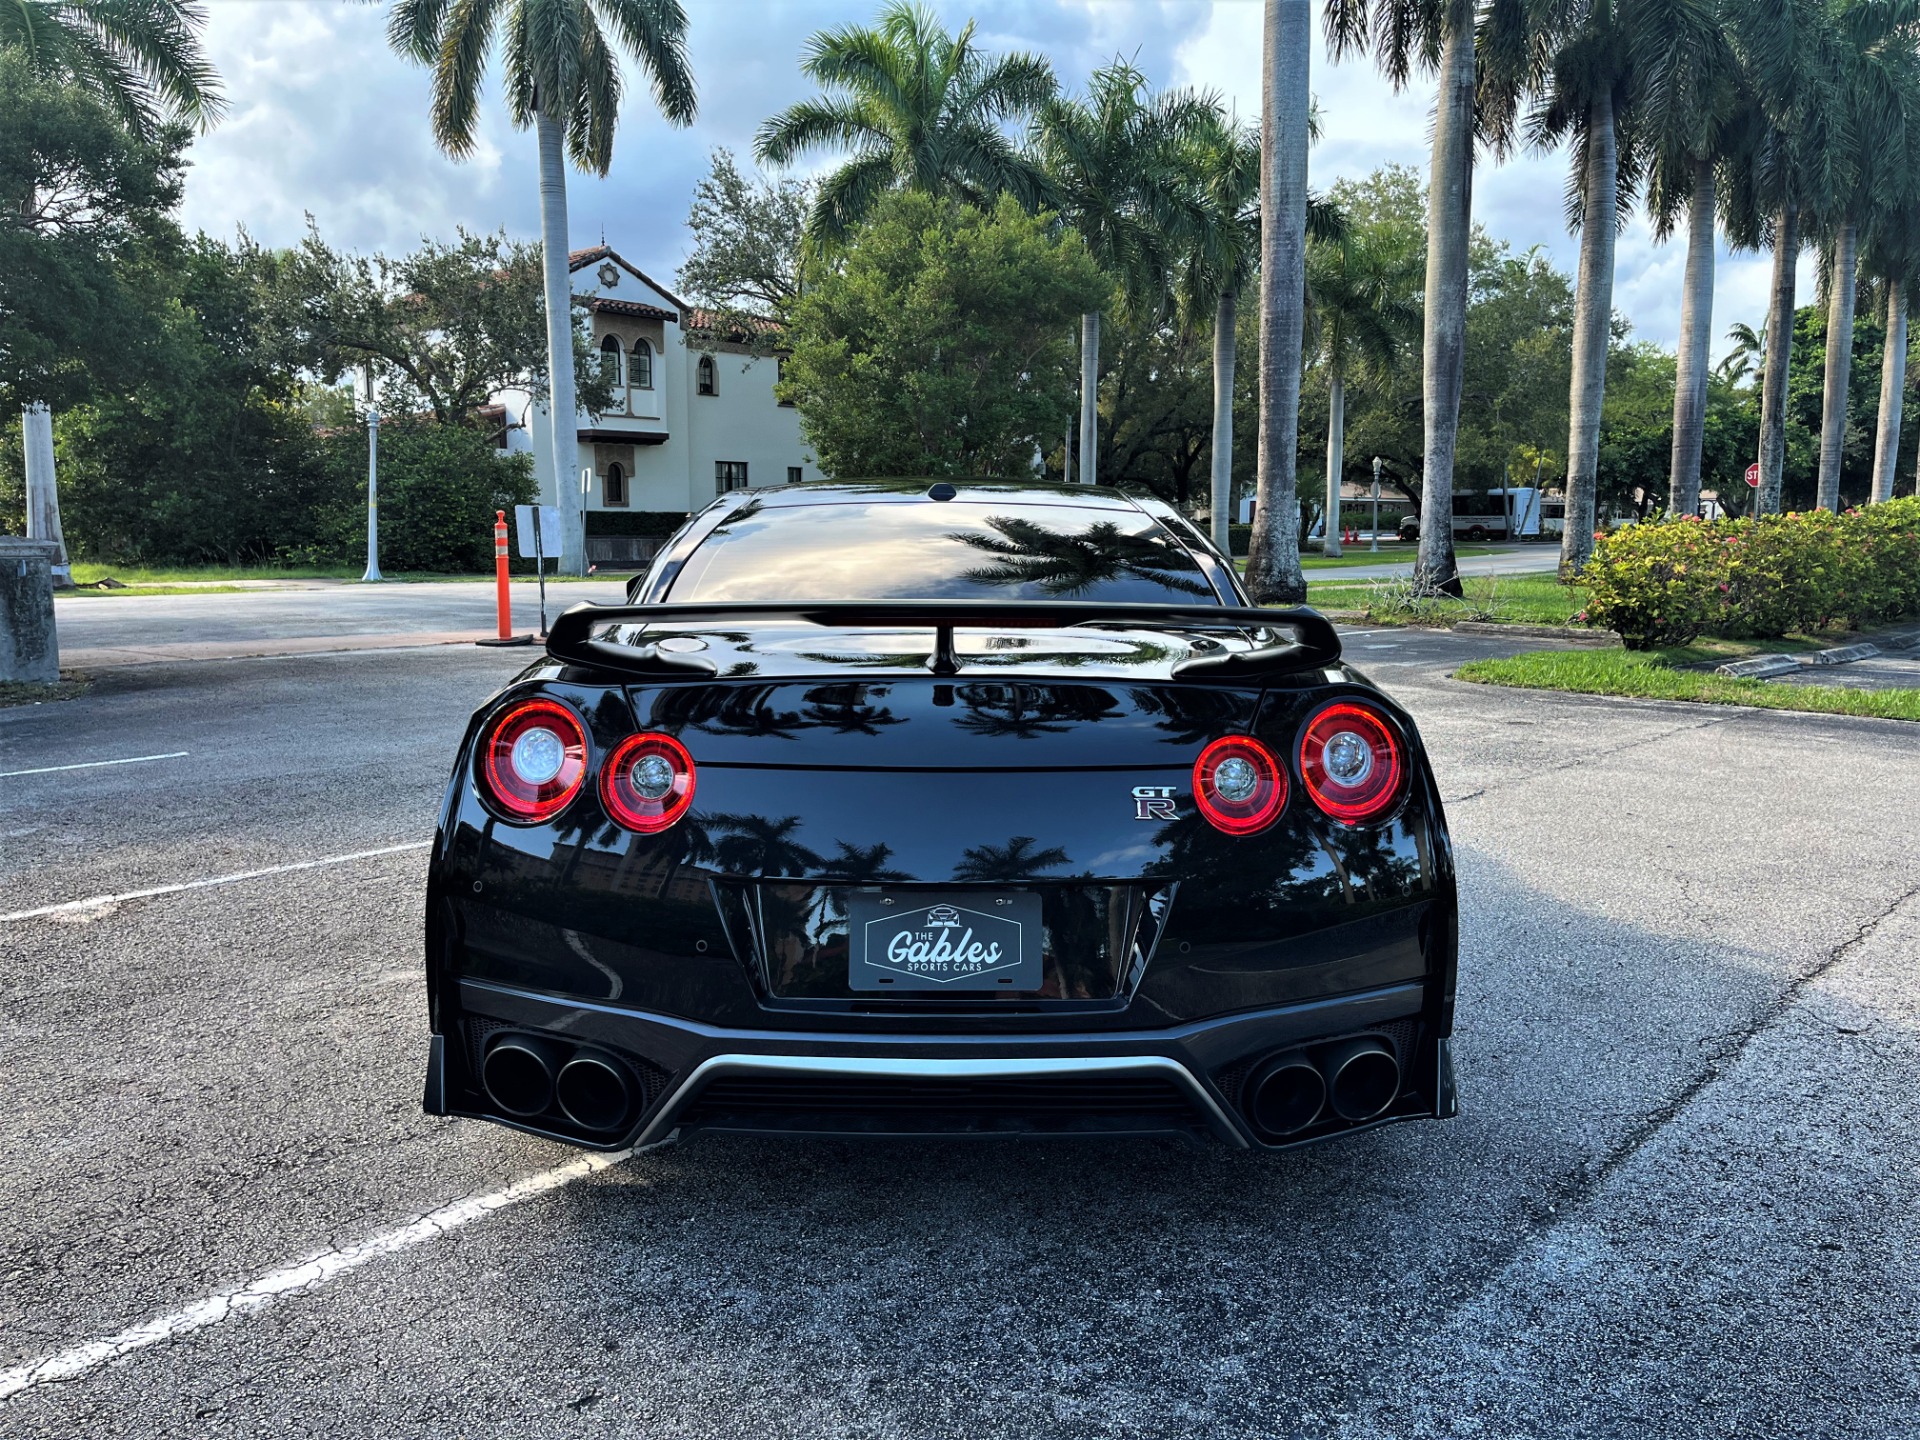 Used 2019 Nissan GT-R Track Edition for sale $115,850 at The Gables Sports Cars in Miami FL 33146 4